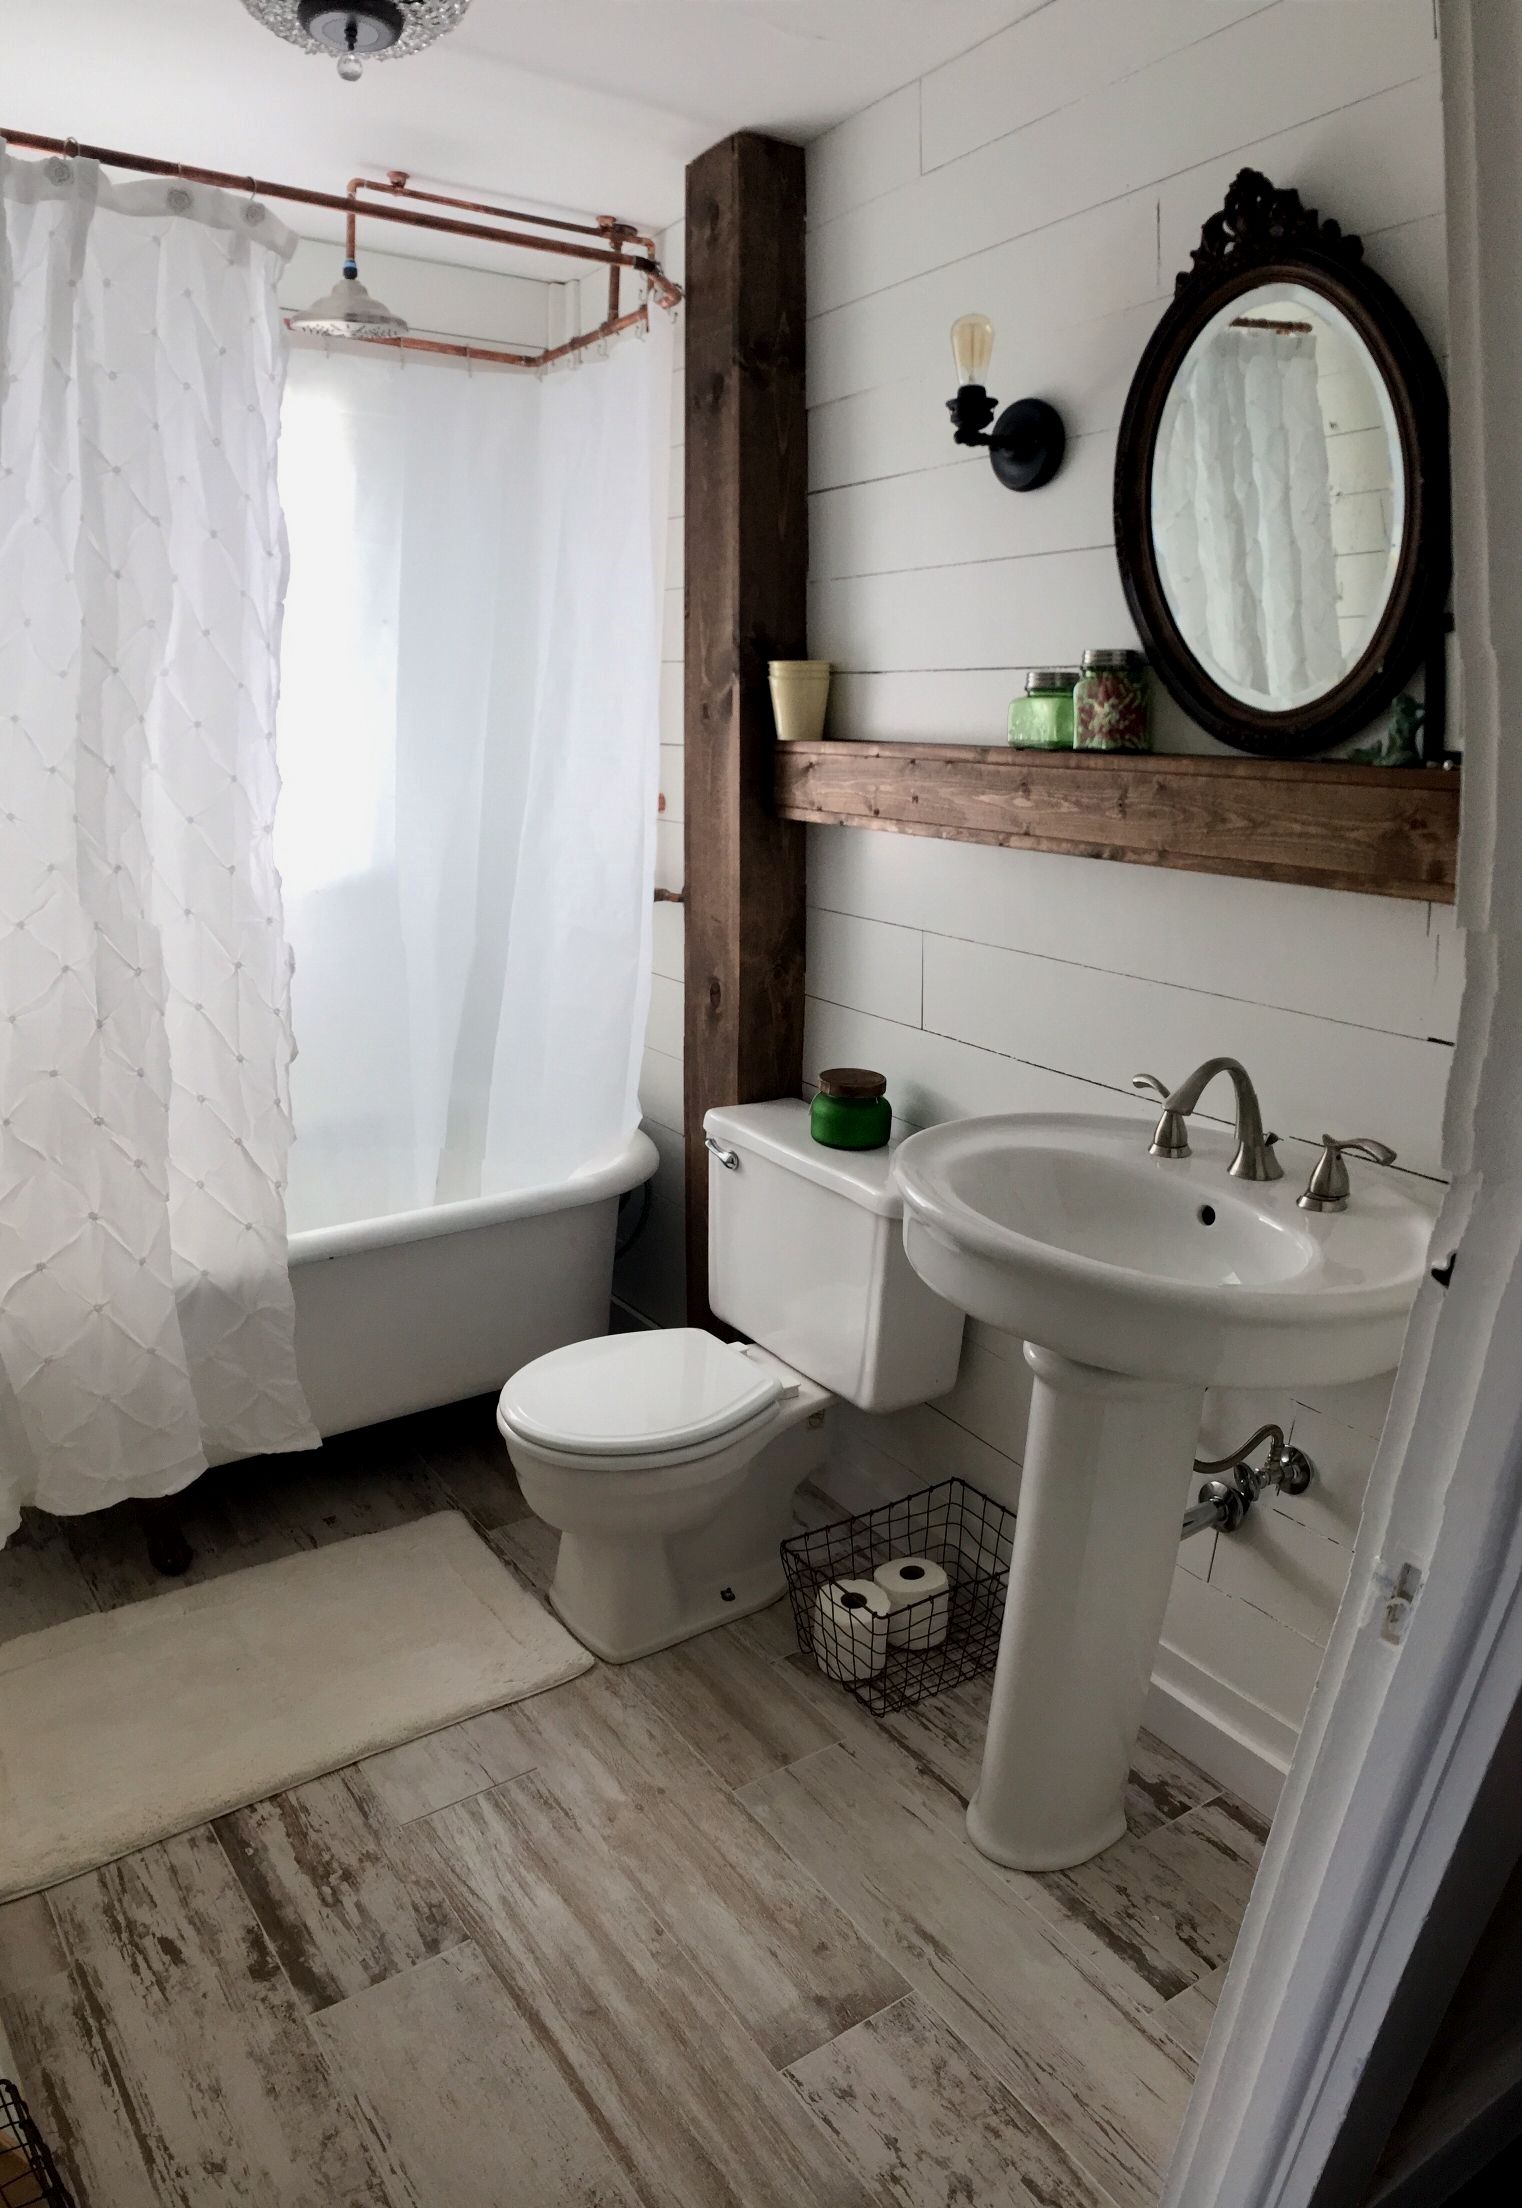 22 Amazing Country Bathroom Ideas for Your Next Restyle